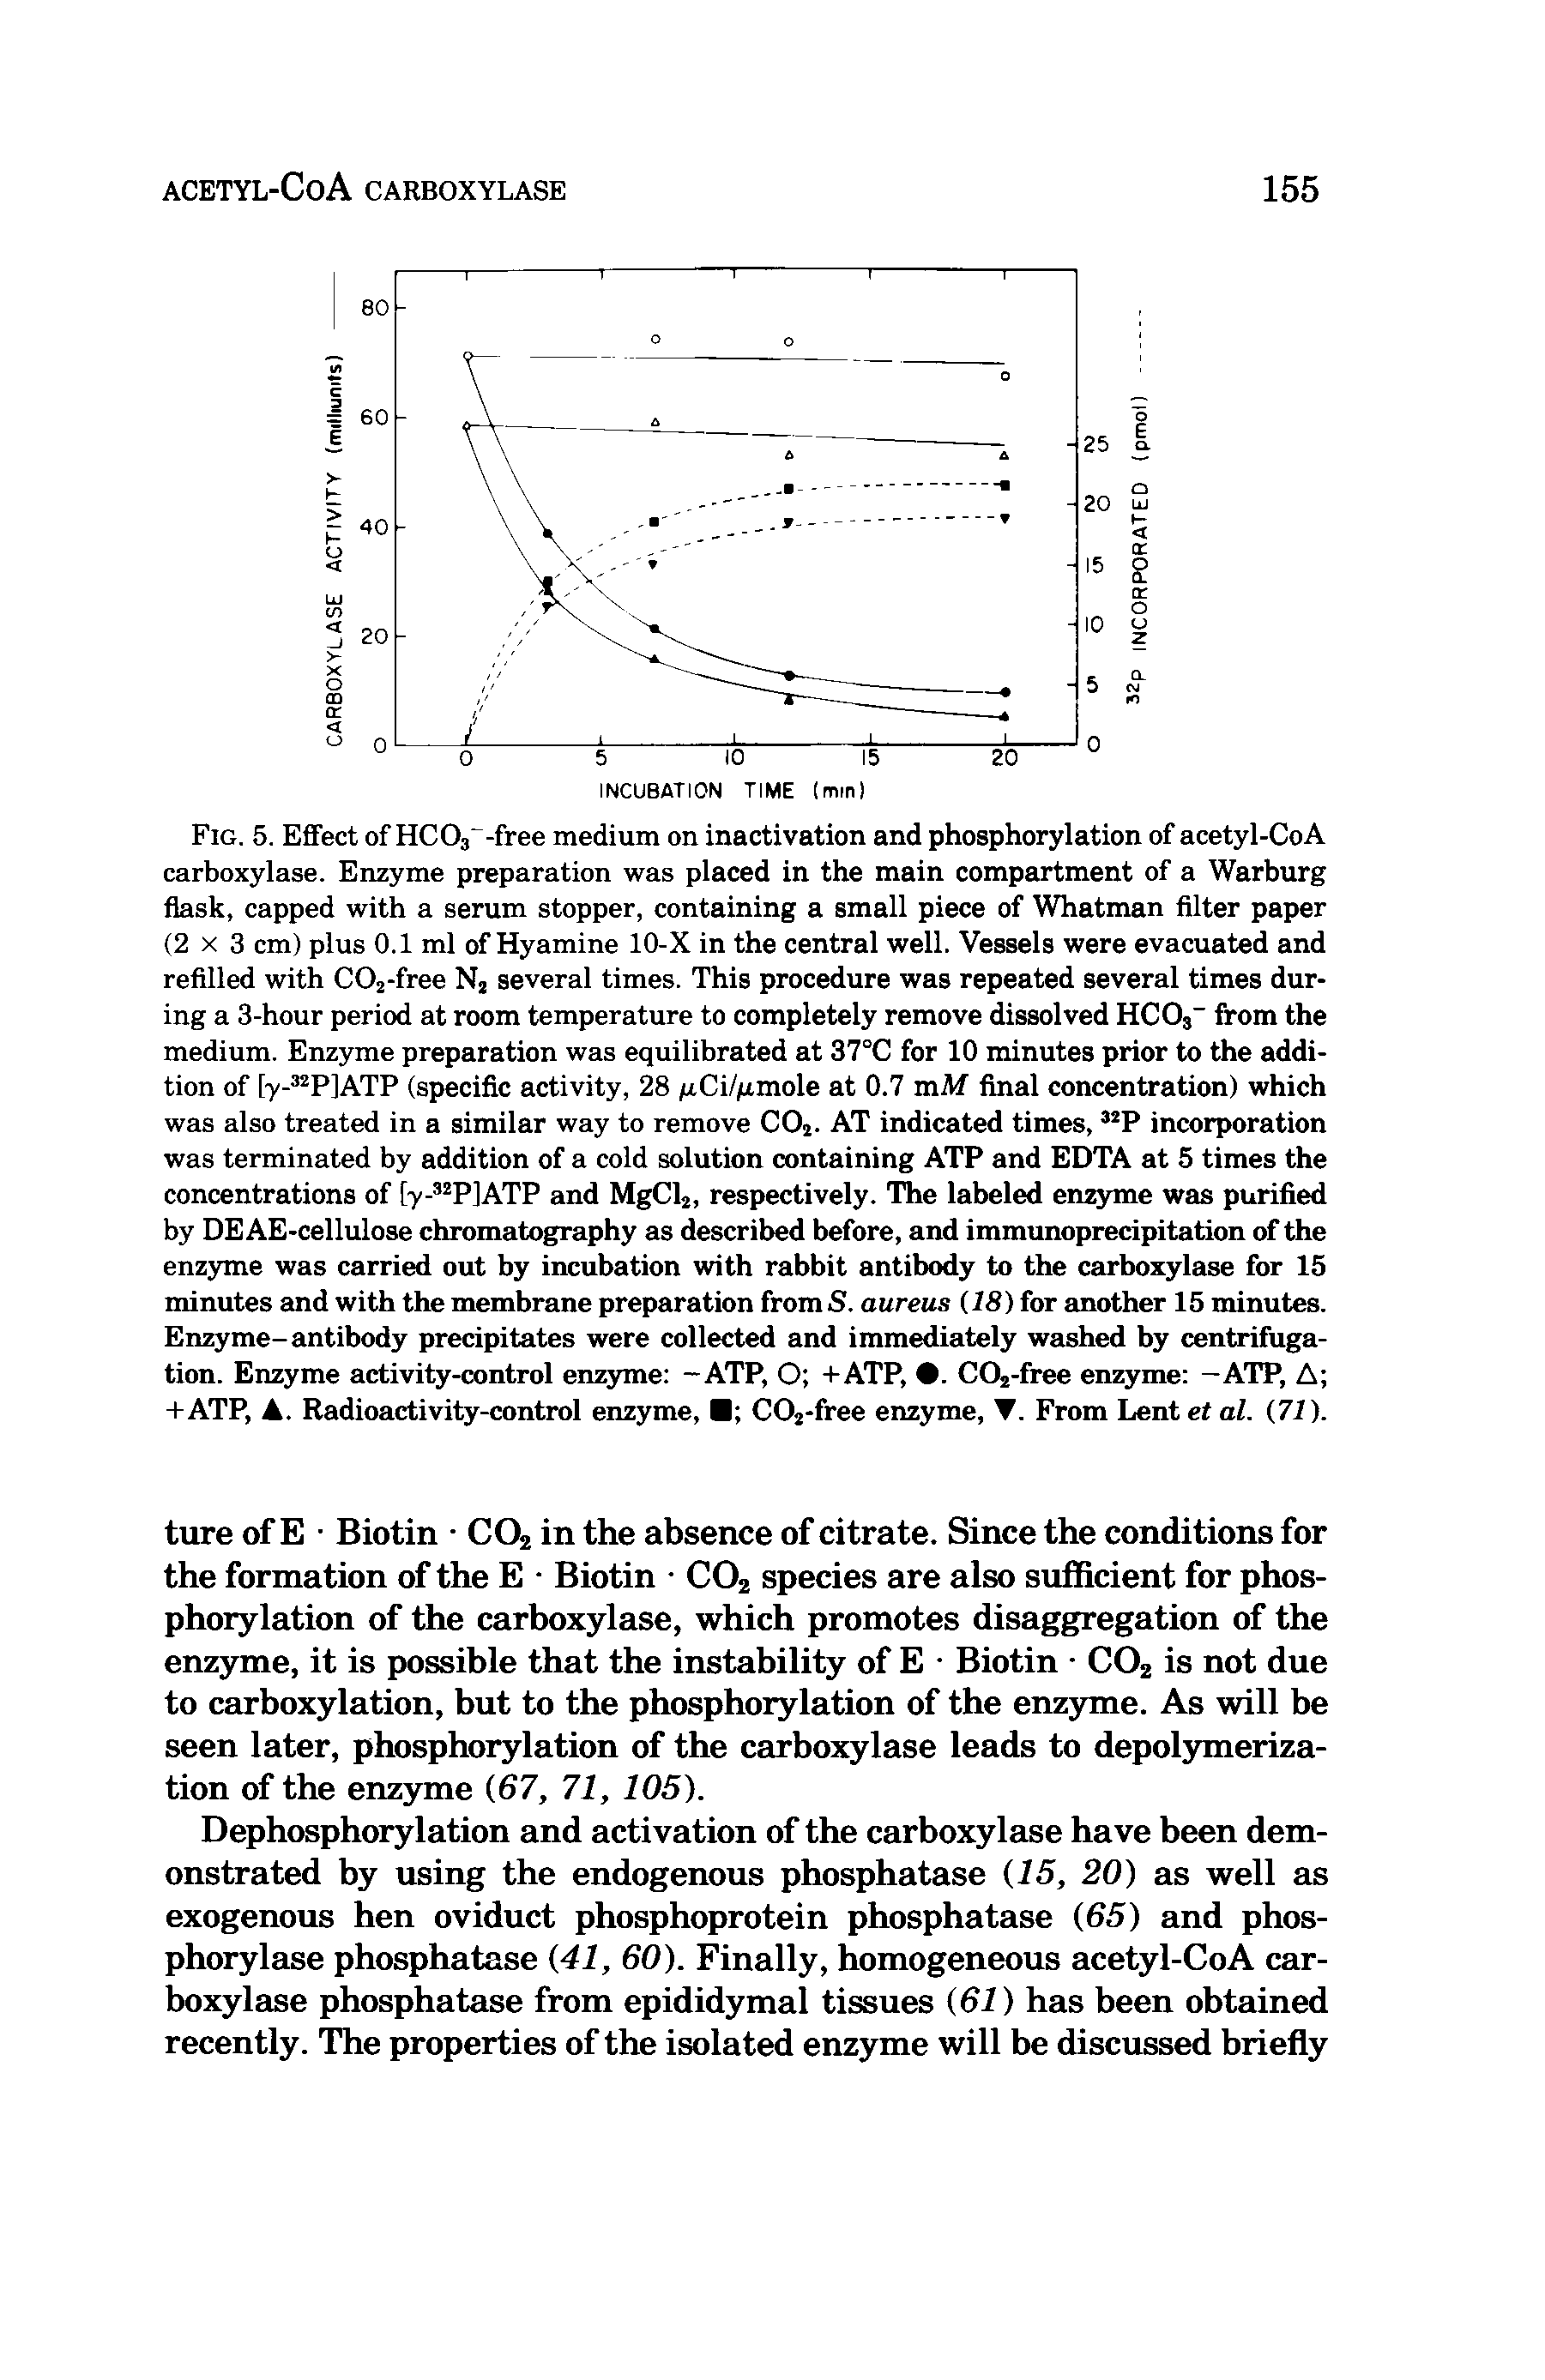 Fig. 5. Effect of HCOj -free medium on inactivation and phosphorylation of acetyl-CoA carboxylase. Enzyme preparation was placed in the main compartment of a Warburg flask, capped with a serum stopper, containing a small piece of Whatman filter paper (2x3 cm) plus 0.1 ml of Hyamine 10-X in the central well. Vessels were evacuated and refilled with COj-free Nj several times. This procedure was repeated several times during a 3-hour period at room temperature to completely remove dissolved HCOs firom the medium. Enzjmie preparation was equilibrated at 37°C for 10 minutes prior to the addition of [y- PlATP (specific activity, 28 iiCi/iimole at 0.7 miW final concentration) which was also treated in a similar way to remove COi. AT indicated times, P incorporation was terminated by addition of a cold solution containing ATP and EDTA at 5 times the concentrations of [y- PlATP and MgCl2, respectively. The labeled en me was purified by DE AE-cellulose chromatography as described before, and immunoprecipitation of the enzyme was carried out by incubation with rabbit antibody to the carboxylase for 15 minutes and with the membrane preparation fromS. aureus (18) for another 15 minutes. Enzyme-antibody precipitates were collected and immediately washed by centrifugation. Enzyme activity-control enzyme -ATP, O +ATP, . COj-free enzyme —ATP, A -H ATP, . Radioactivily-control enzyme, C02-free enzyme, . From Lent et al. (71).